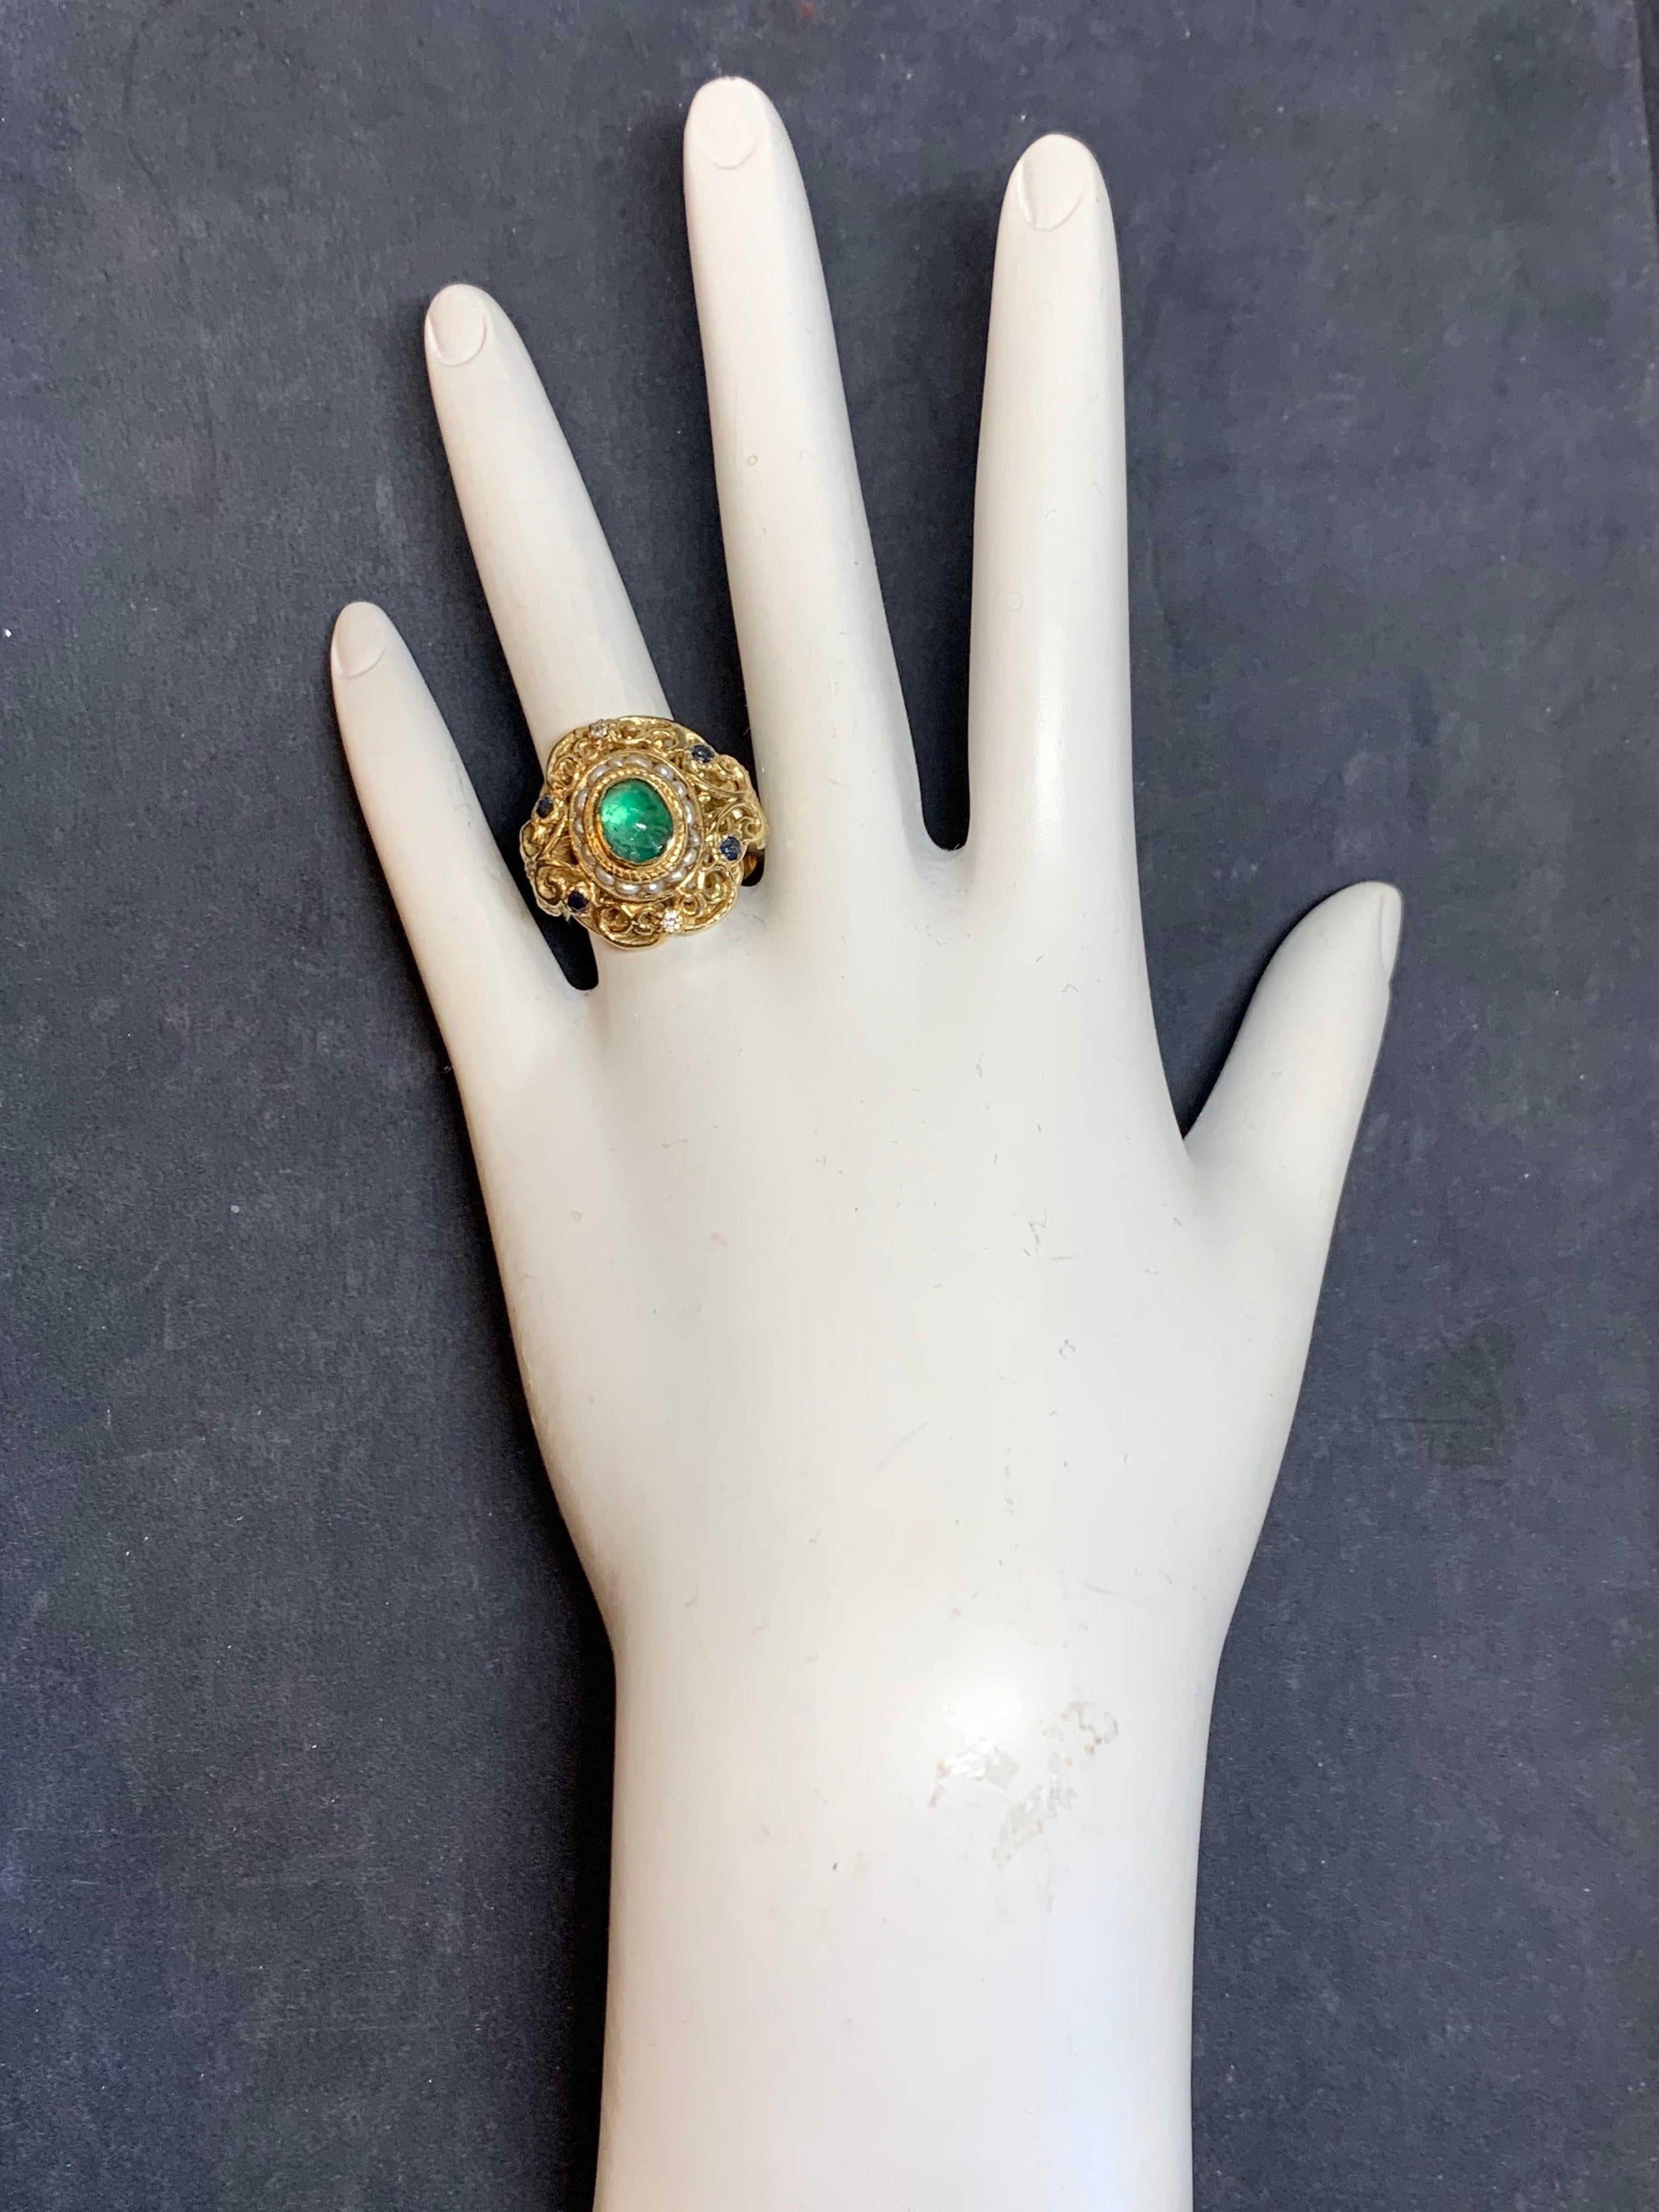 Retro 14k Yellow Gold Cocktail Ring set with approximately 2 carats including a Natural Emerald Cabochon, Sapphires, Diamonds & Pearls.

The center cabochon natural emerald measures approximately 7.8x5.5 and weighs approximately 1.50 carats.

The